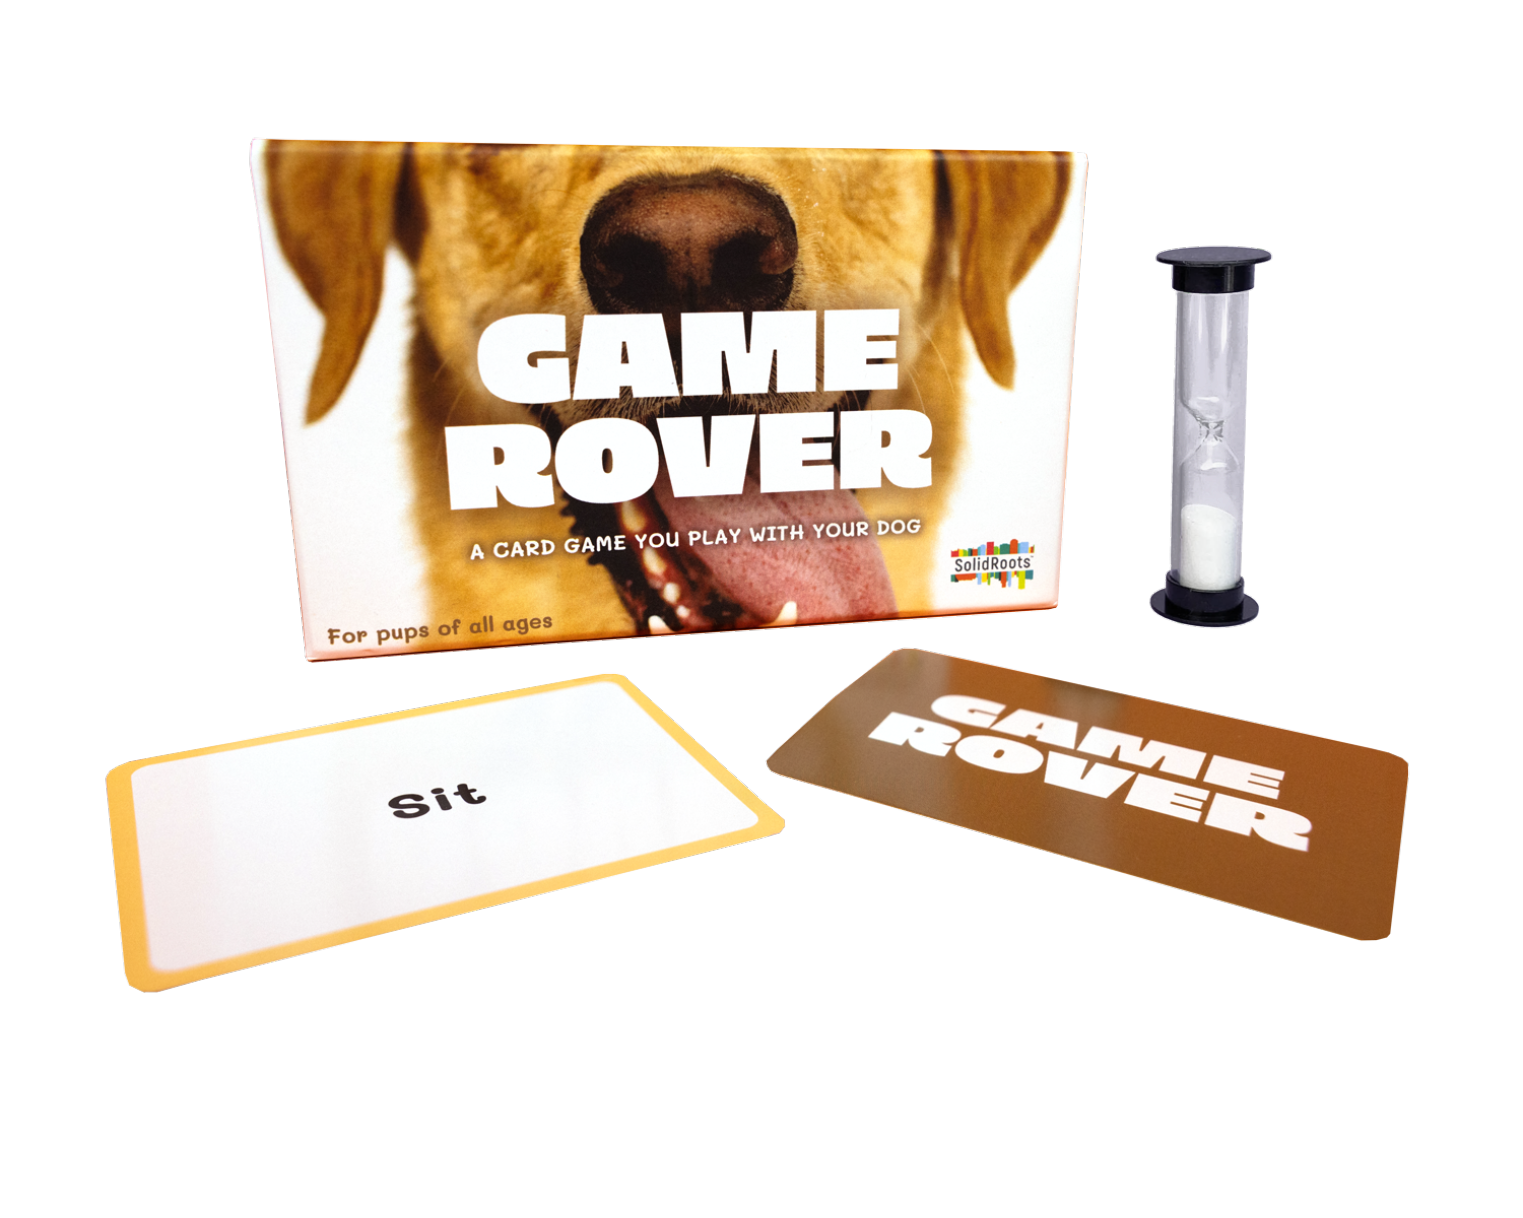 Game rover image